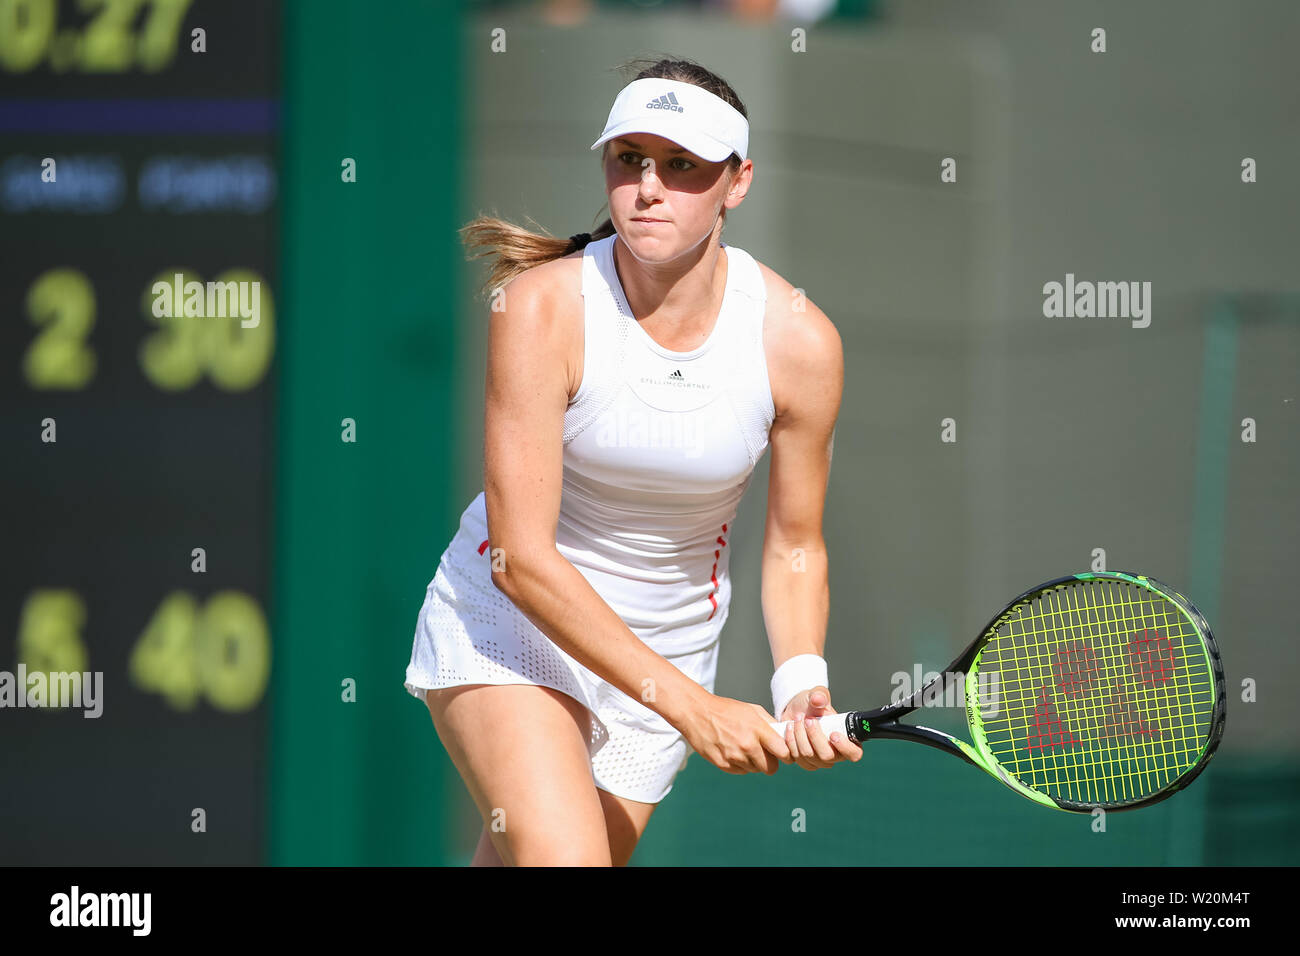 Wimbledon, London, UK. 4th July 2019. Kaja Juvan of Slovenia during the  women's singles second round match of the Wimbledon Lawn Tennis  Championships against Serena Williams of the United States at the